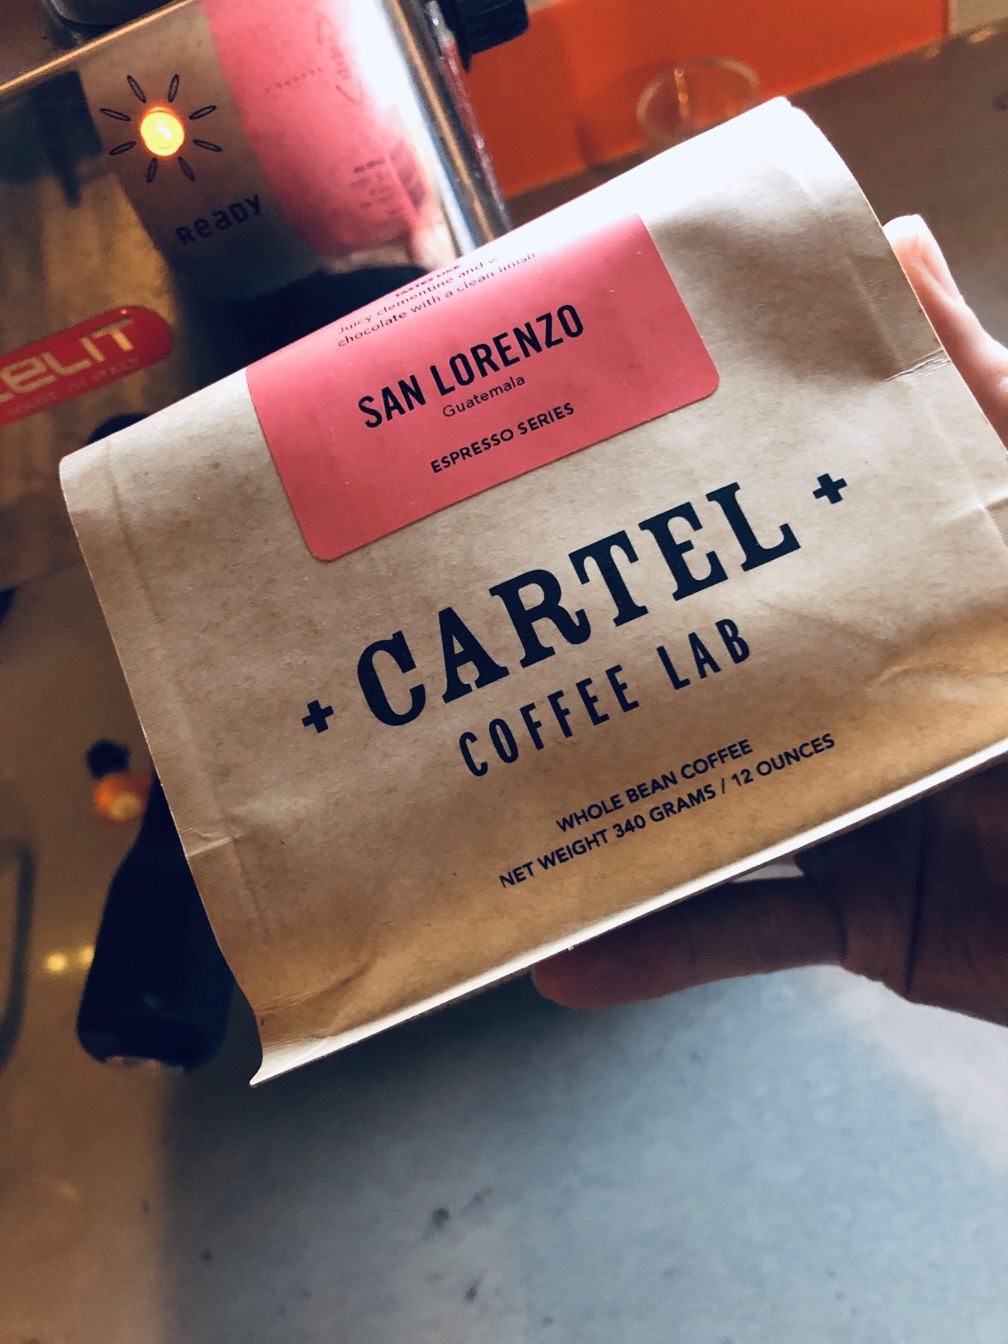 A bag of whole coffee beans with a bright orange label from Cartel Coffee Lab.  